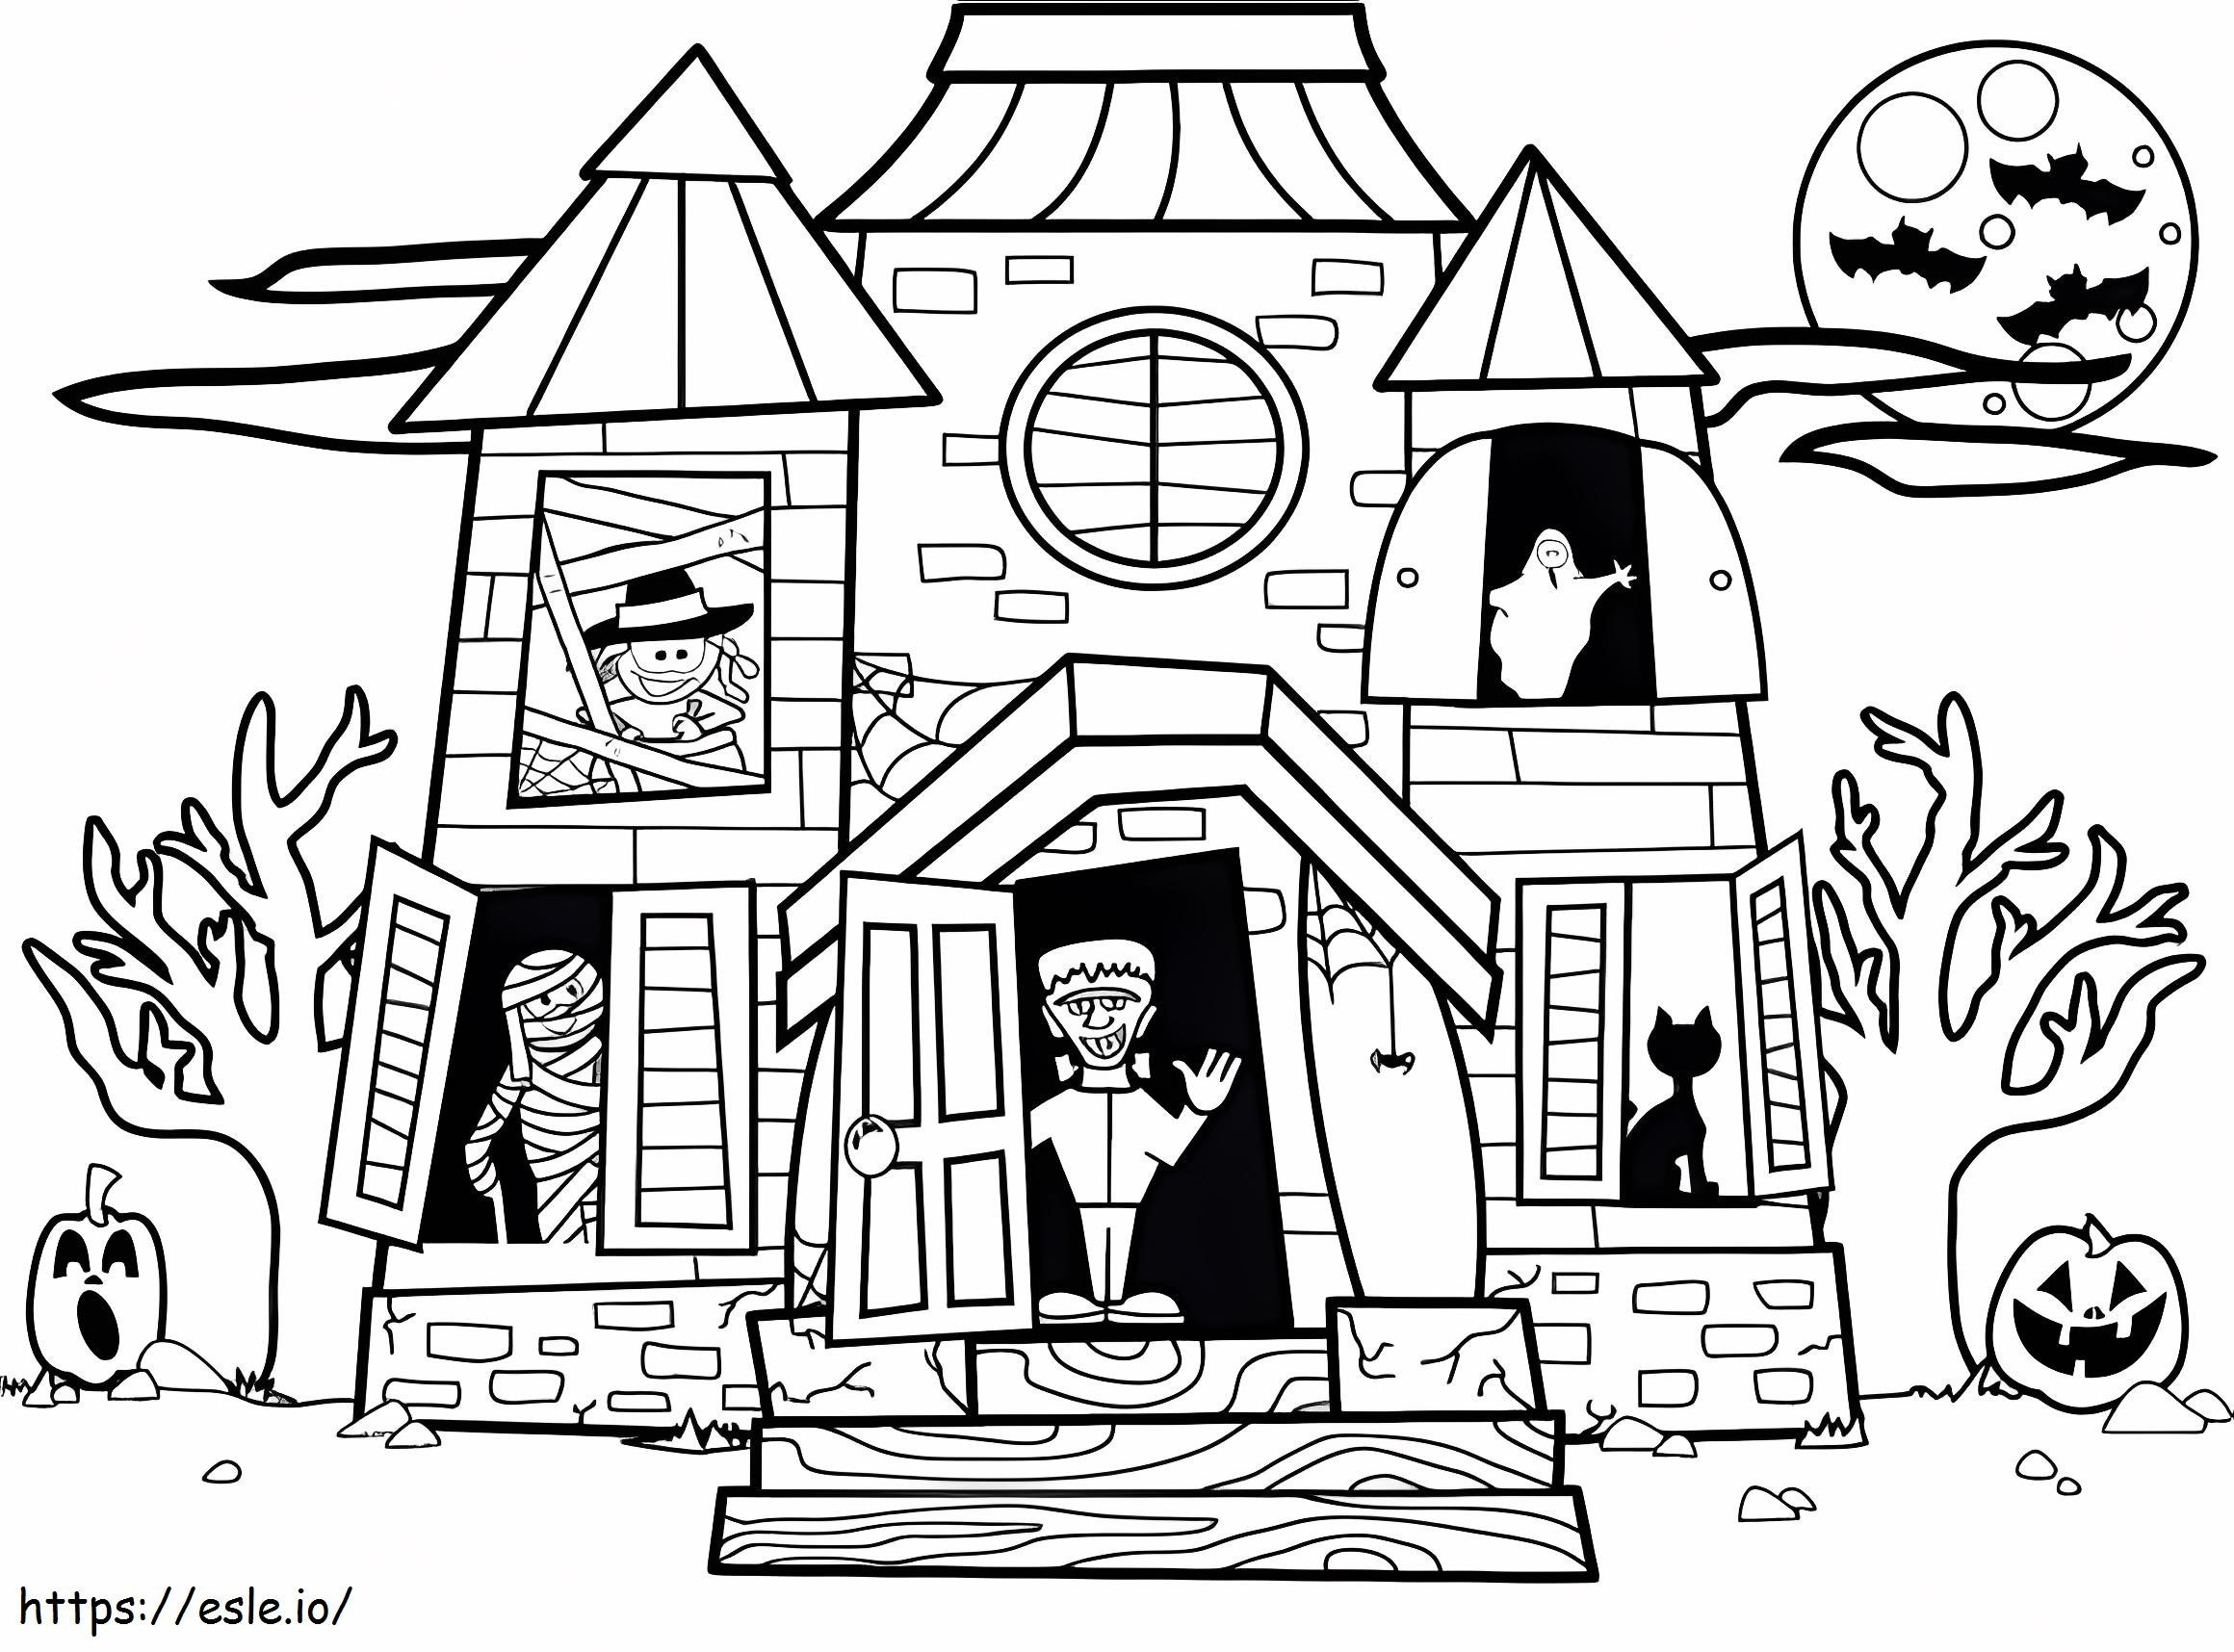 Halloween Haunted House coloring page